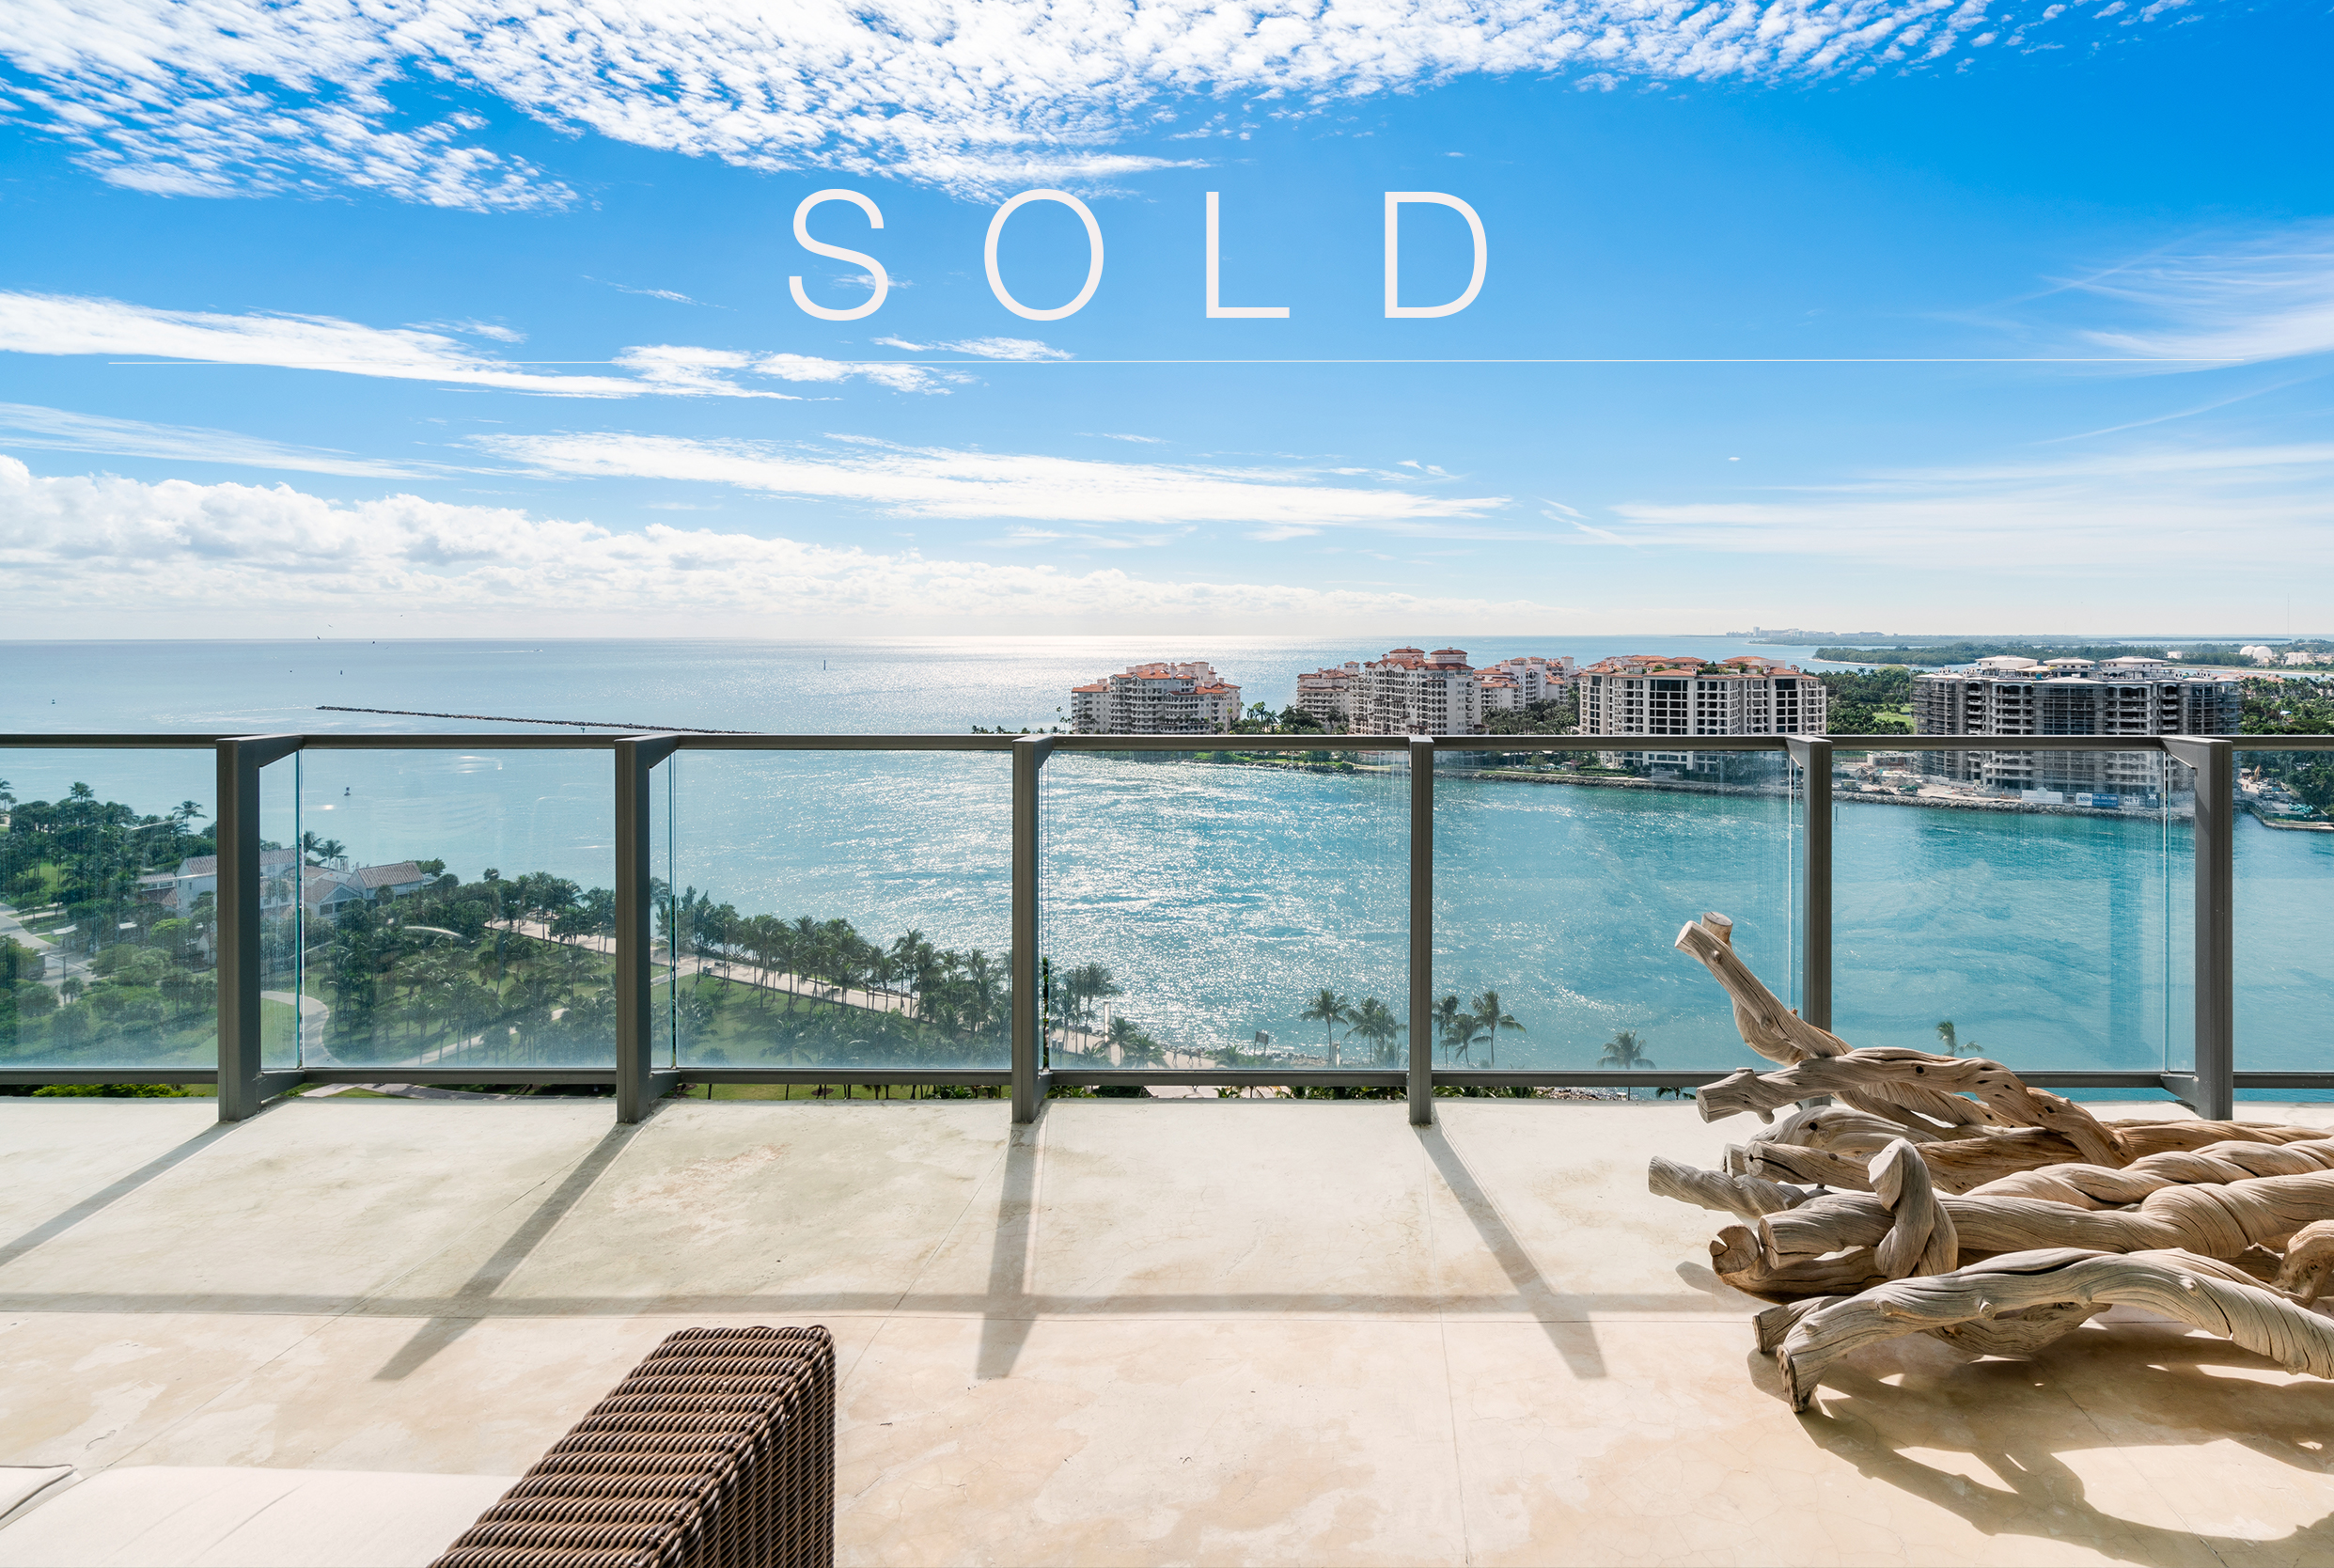 Sold luxury condo at Apogee South Beach by Top Producing Realtor Nelson Gonzalez